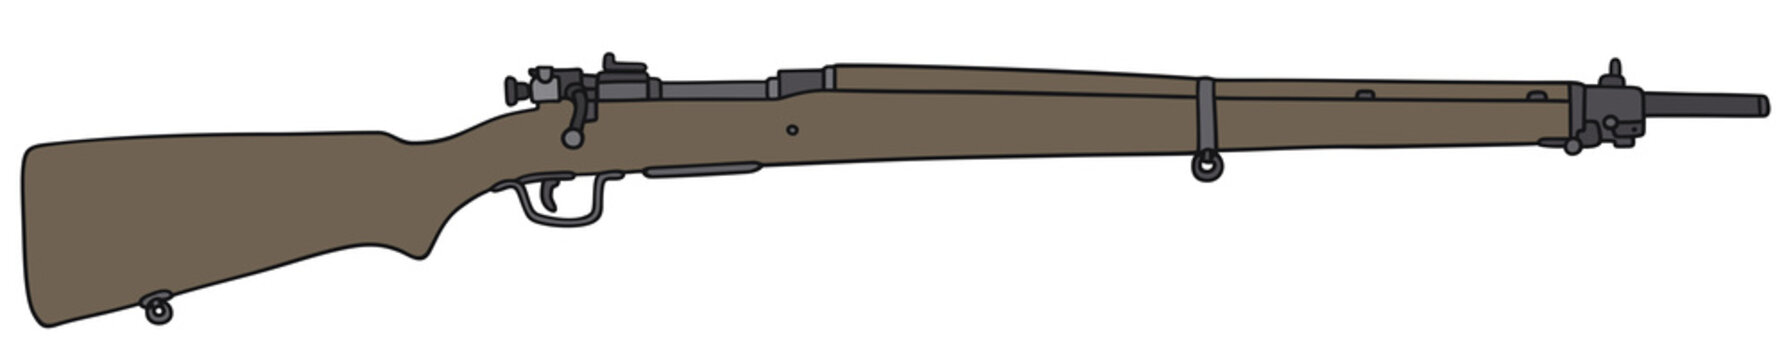 Hand drawing of an old military rifle